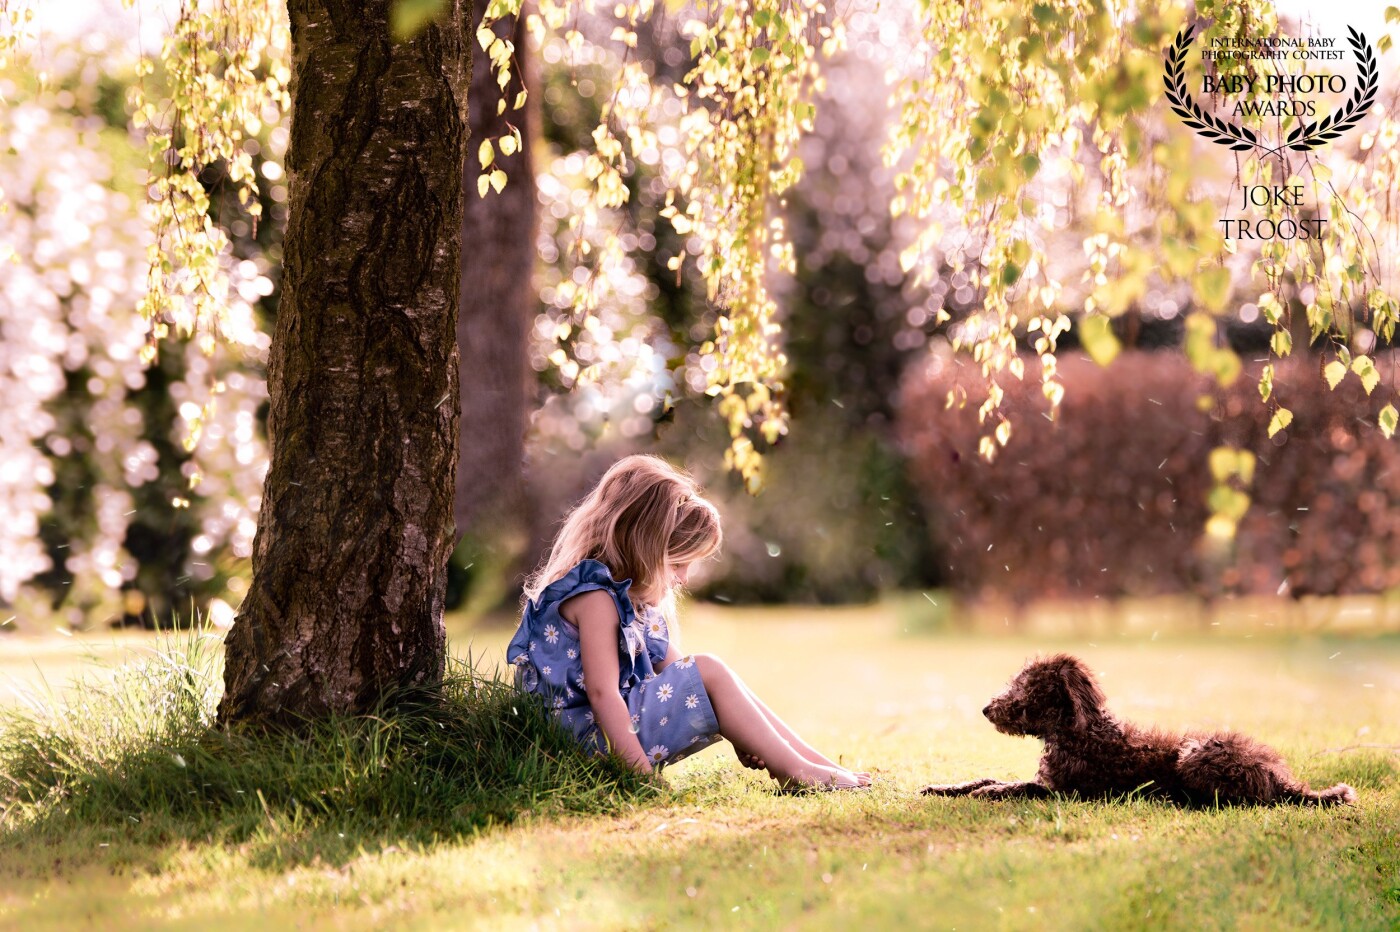 This cute puppy was only 8 weeks at the time this picture was taken. When I saw this beautiful location with the tree  I knew I had to go back with the morning light to take a dreamy shot. The connection between this 4 years old and her dog makes me melt <3